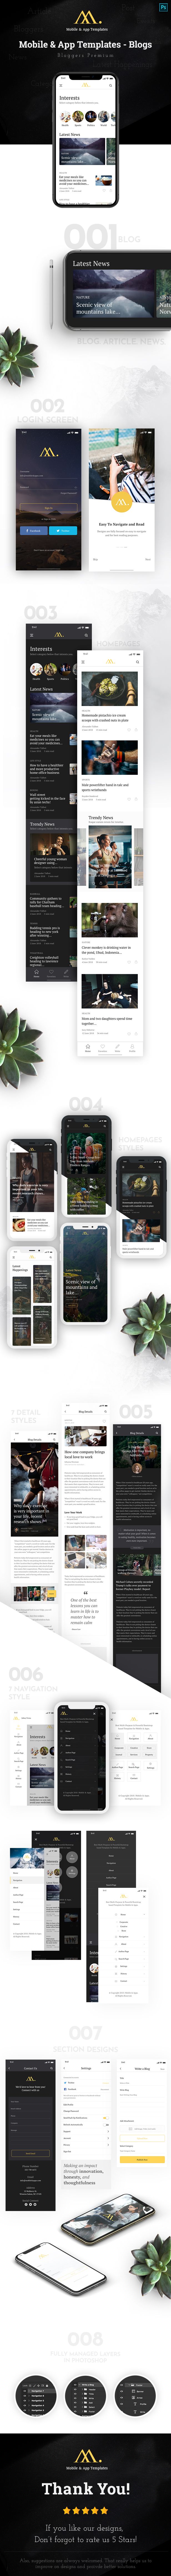 Mobile & App Templates - Blogs in Photoshop - 1